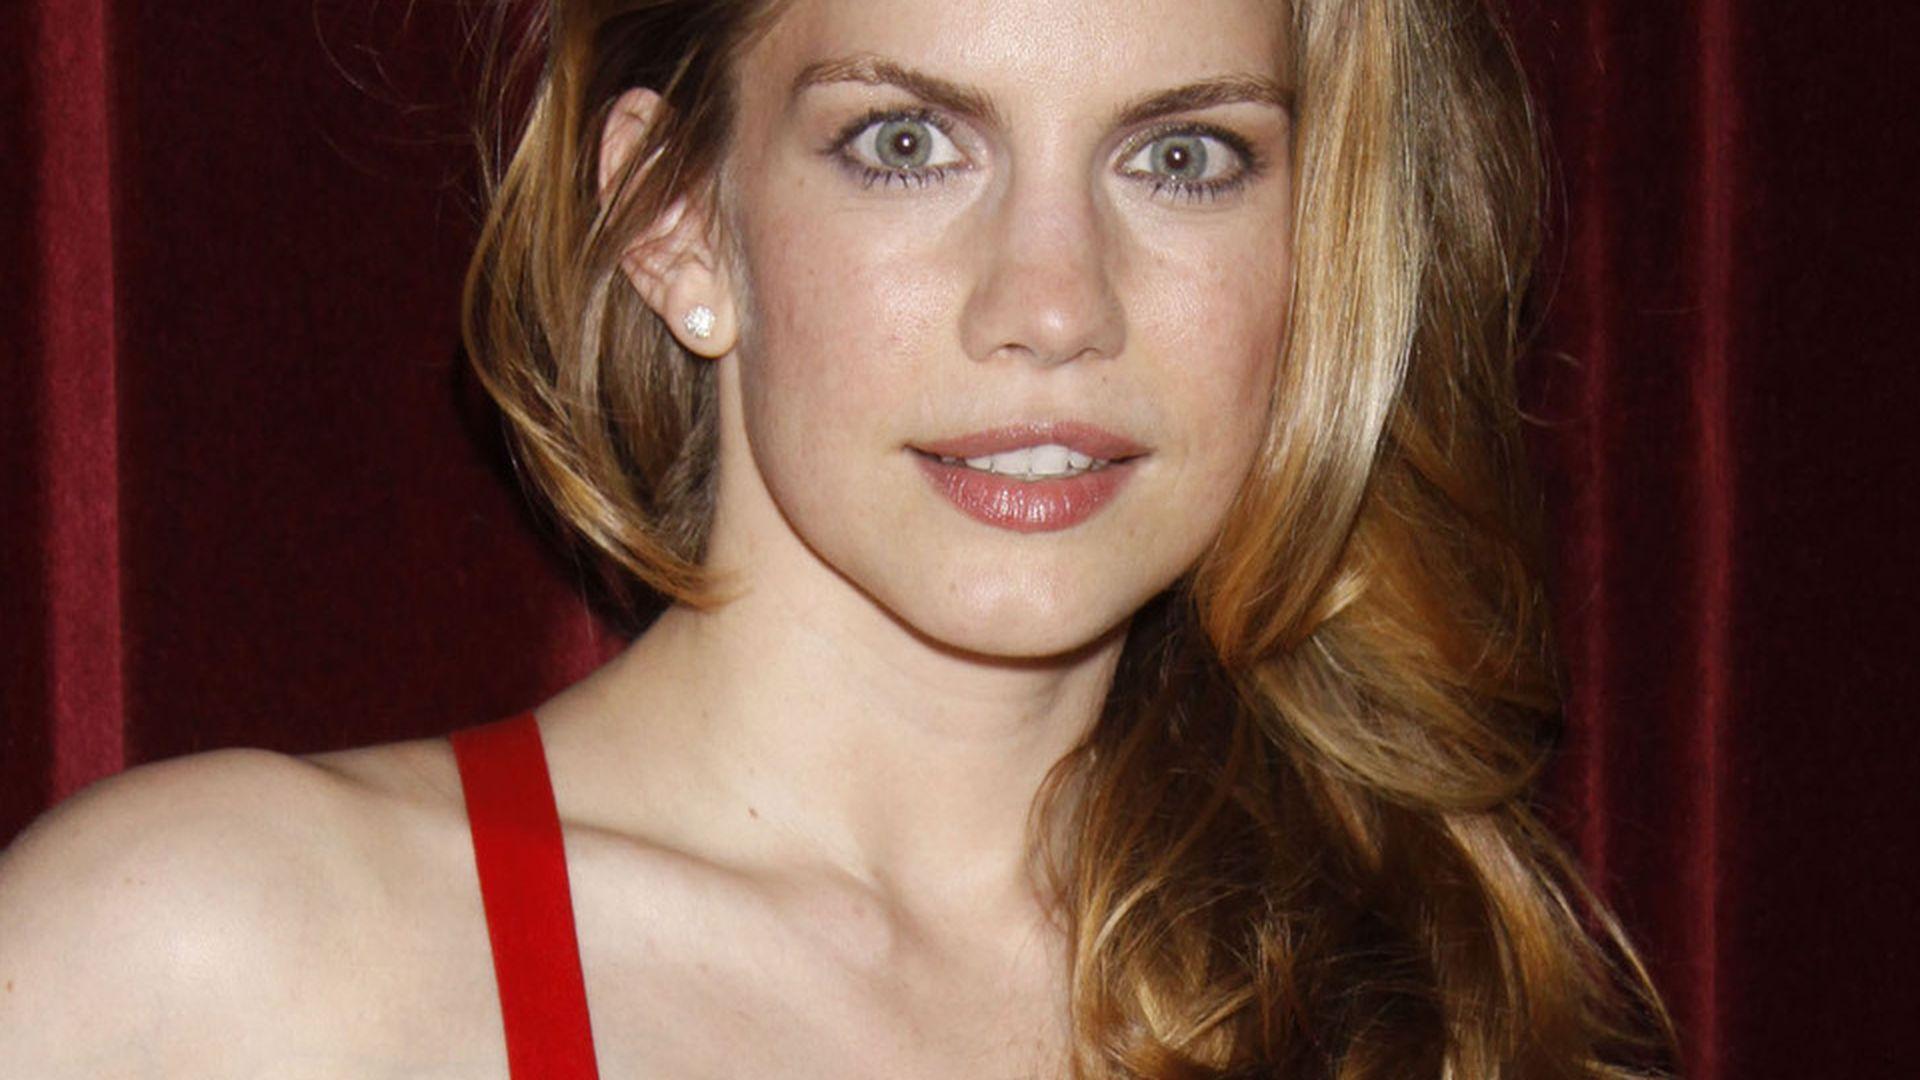 Anna Chlumsky Wallpapers Image Photos Pictures Backgrounds.